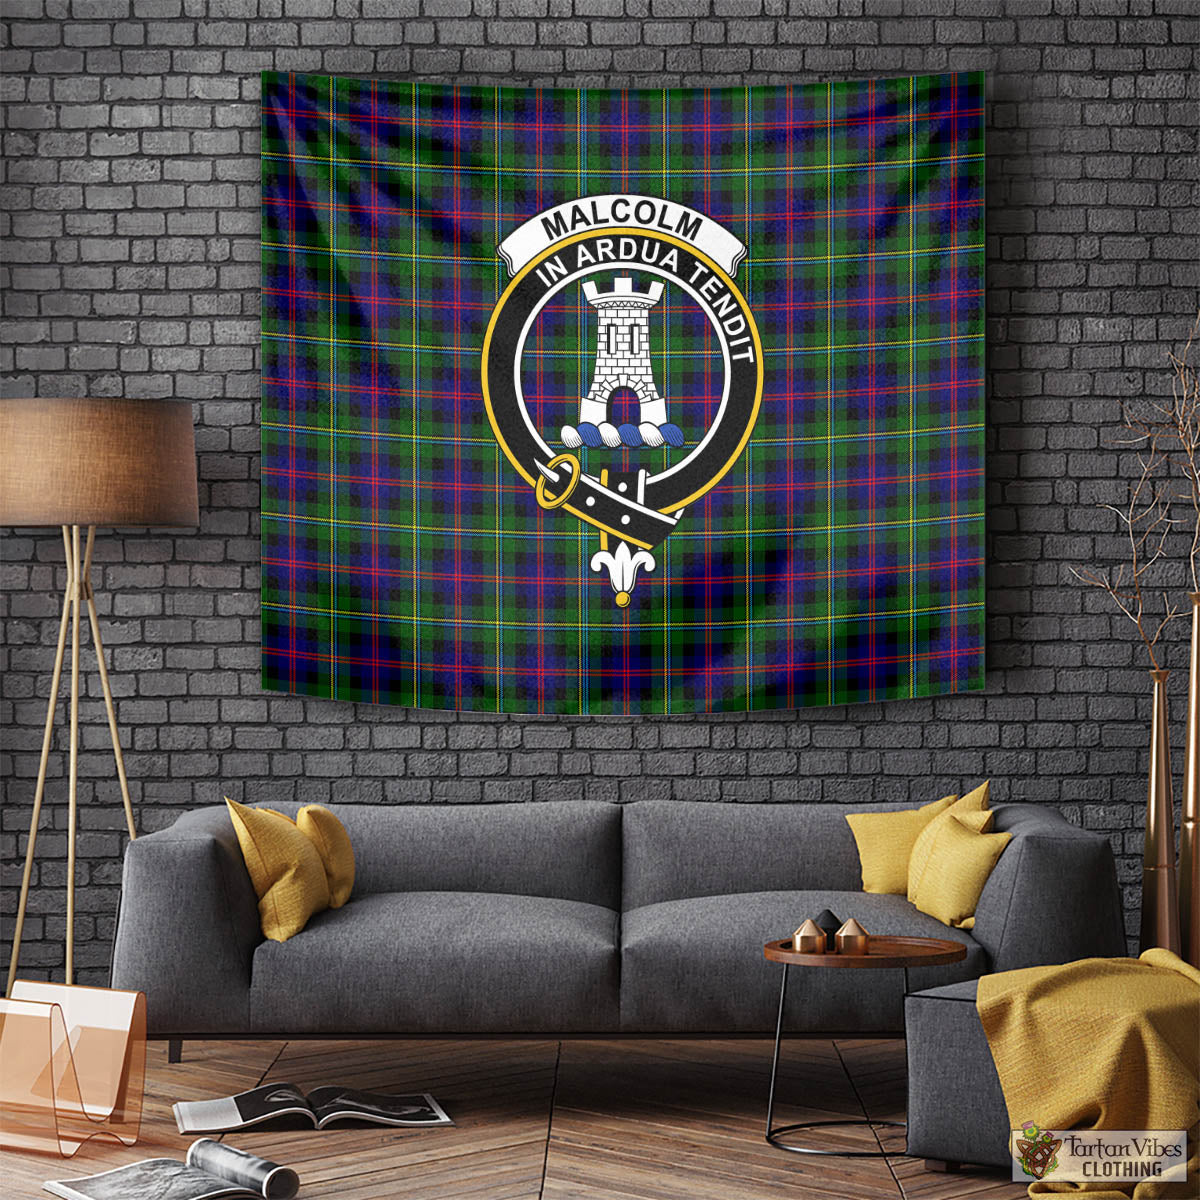 Tartan Vibes Clothing Malcolm Tartan Tapestry Wall Hanging and Home Decor for Room with Family Crest